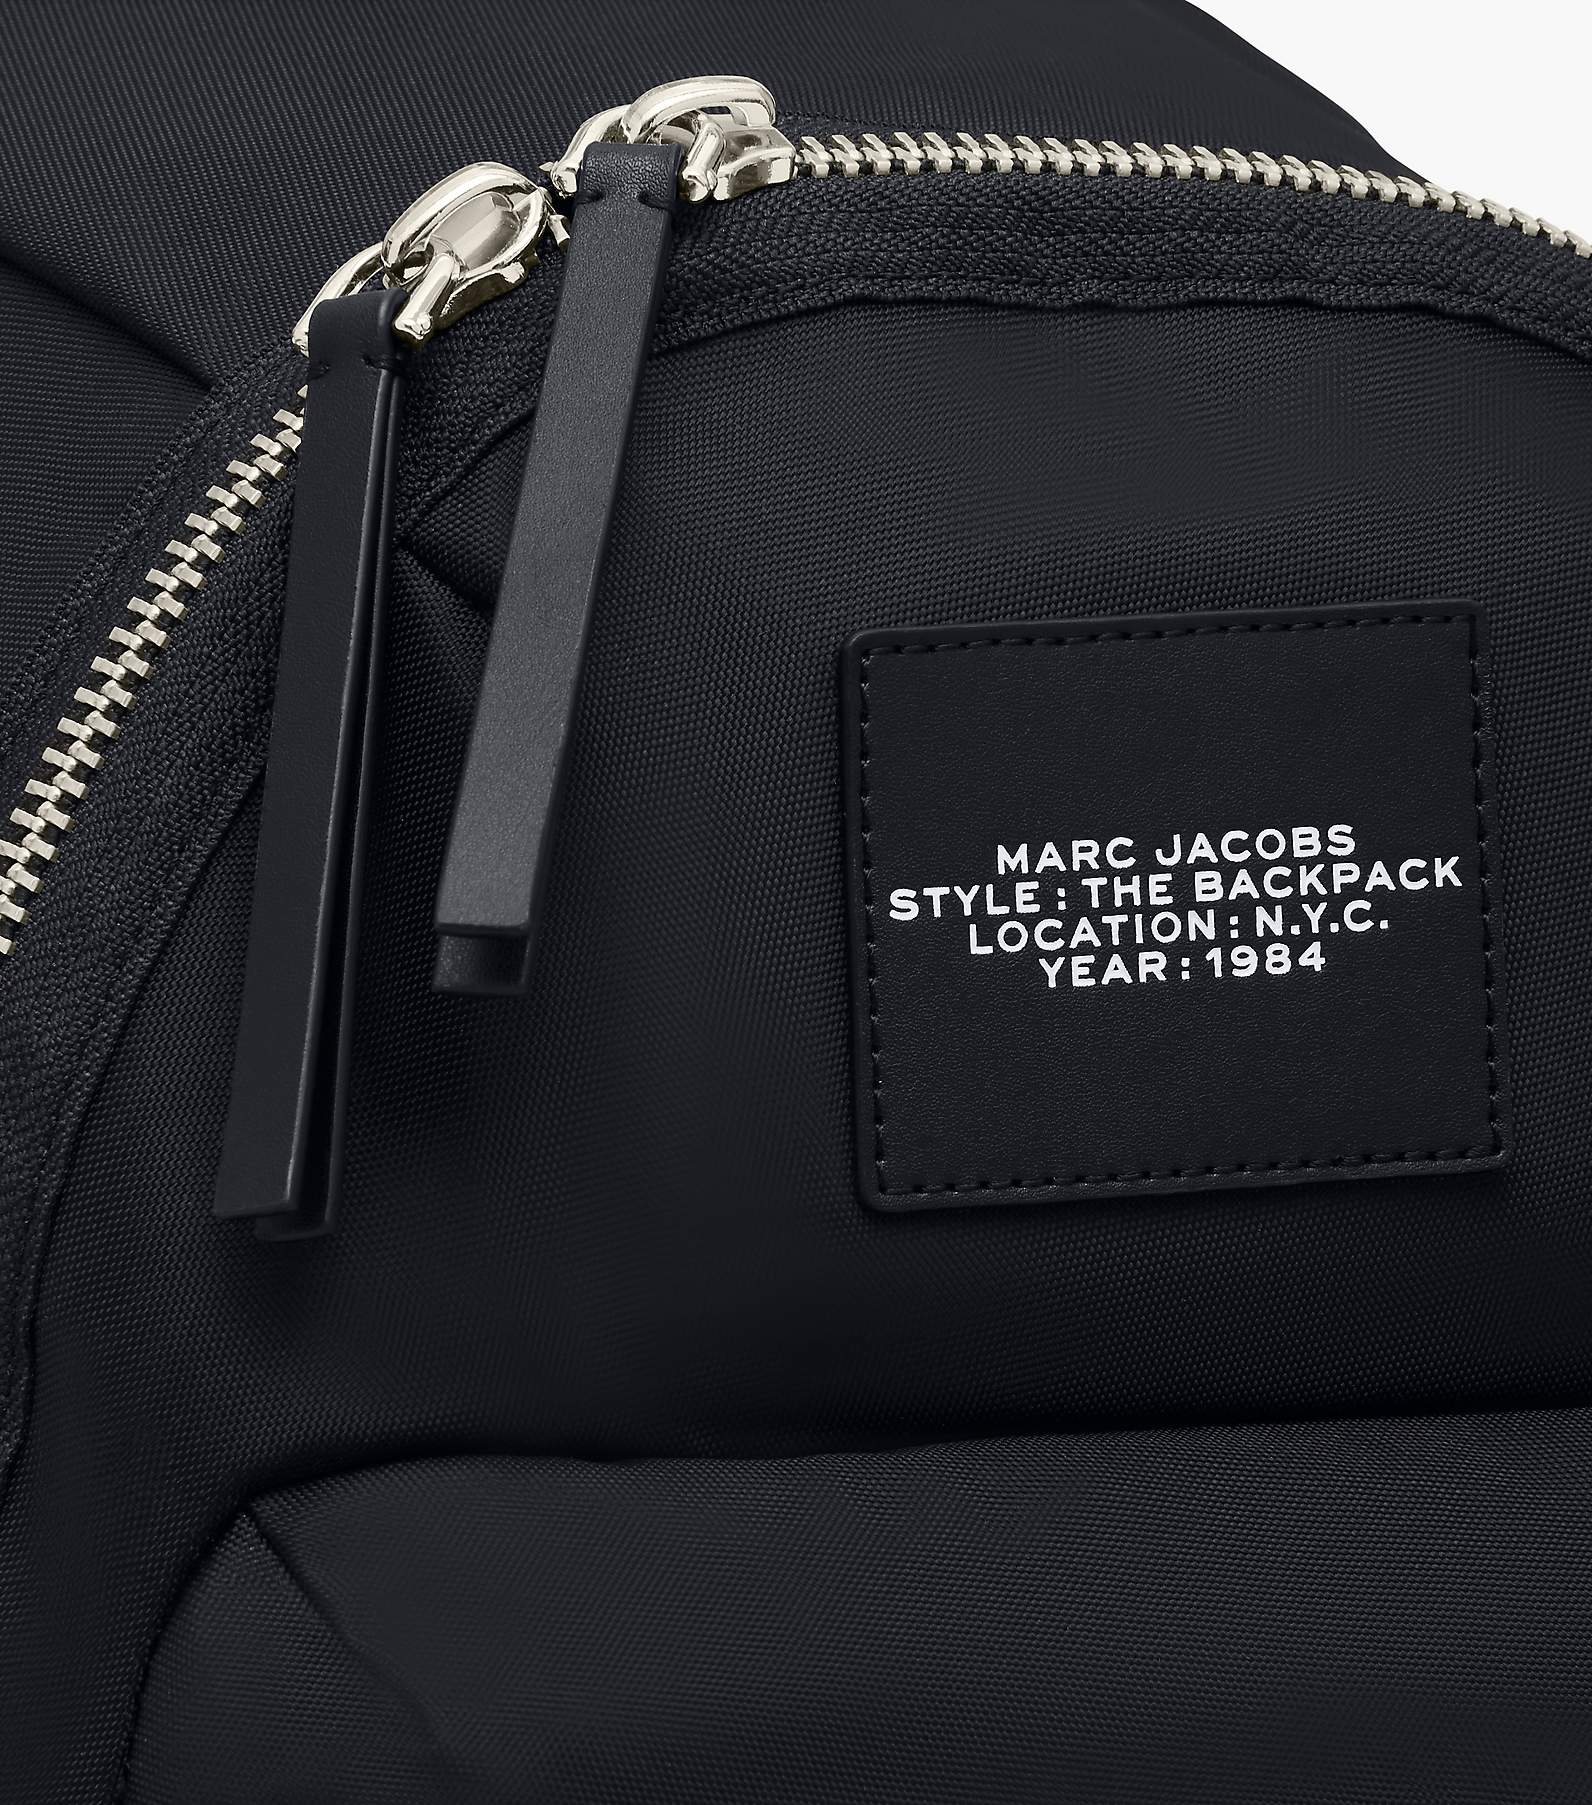 MARC JACOBS The Book Bag